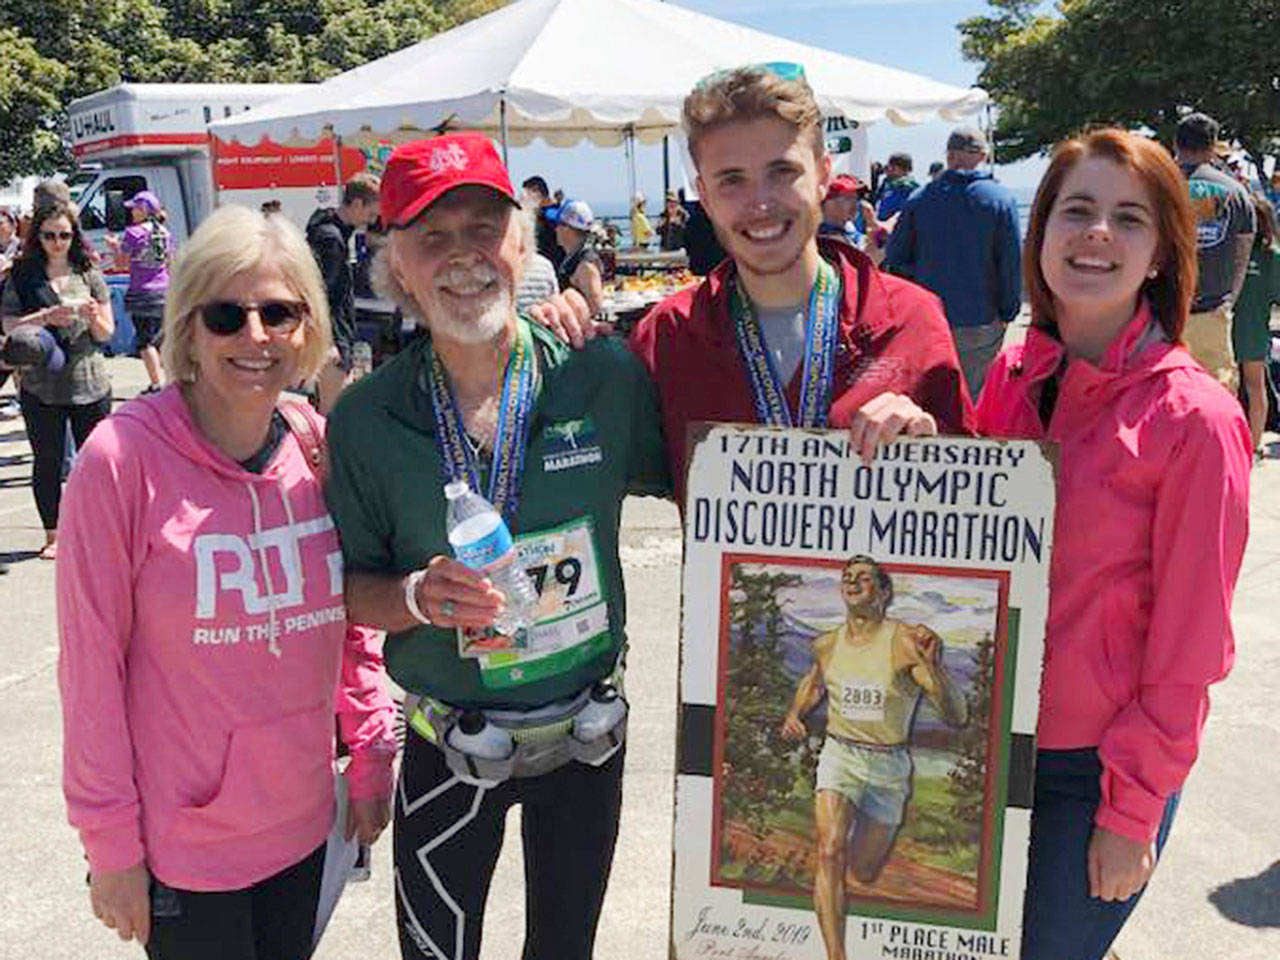 Sequim’s Mikey Cobb, third from left, celebrates a North Olympic Discovery Marathon win on June 2 with family members. They include, from left, parents Trisha and Michael Cobb (who also ran the full marathon) and sister Alison Cobb. Photo courtesy of Michael Cobb